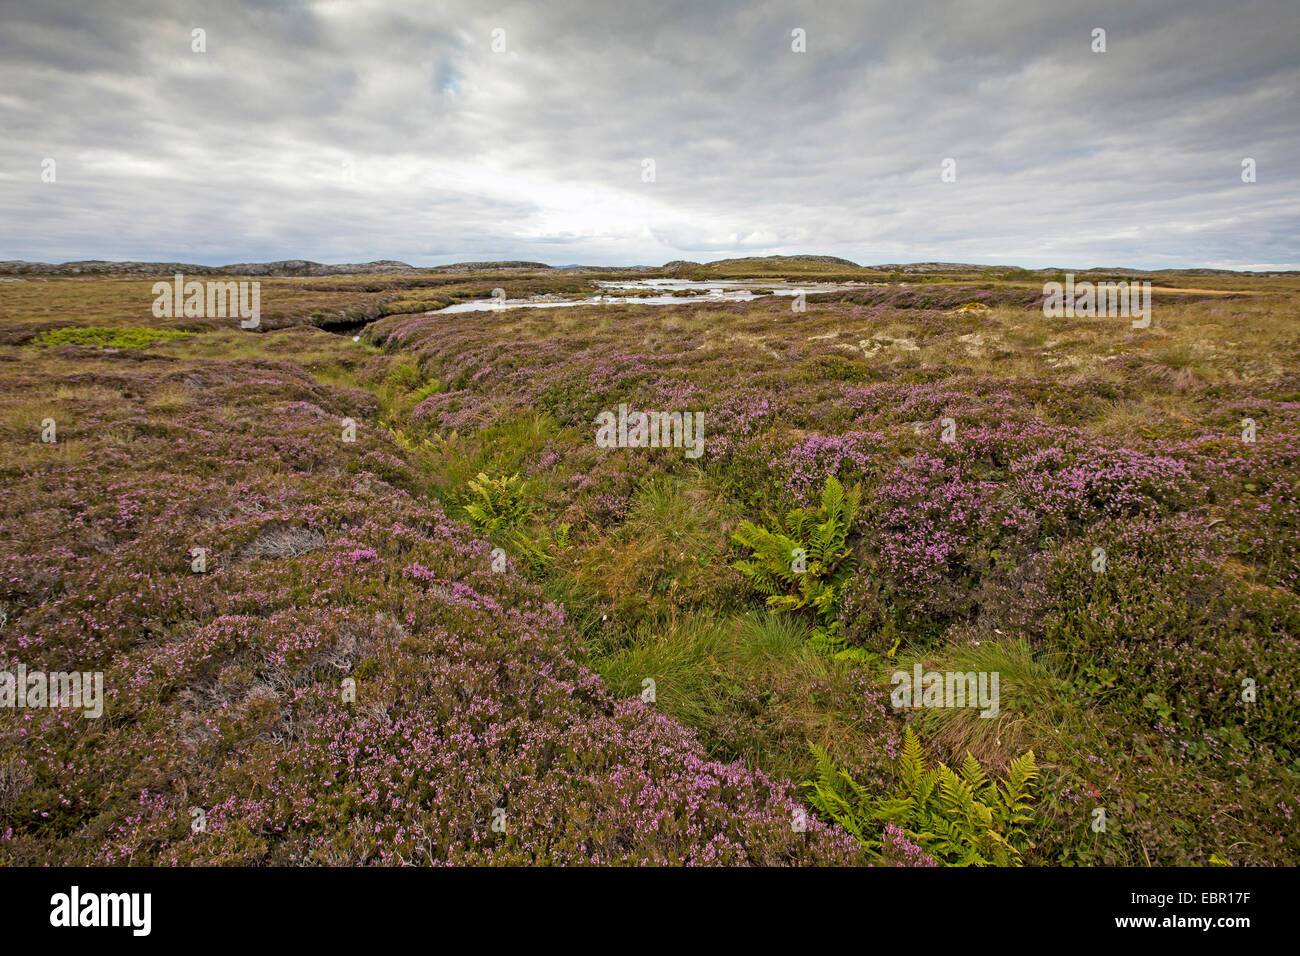 Common Heather, Ling, Heather (Calluna vulgaris), blooming at the edge of a mire, Norway, Hitra Stock Photo